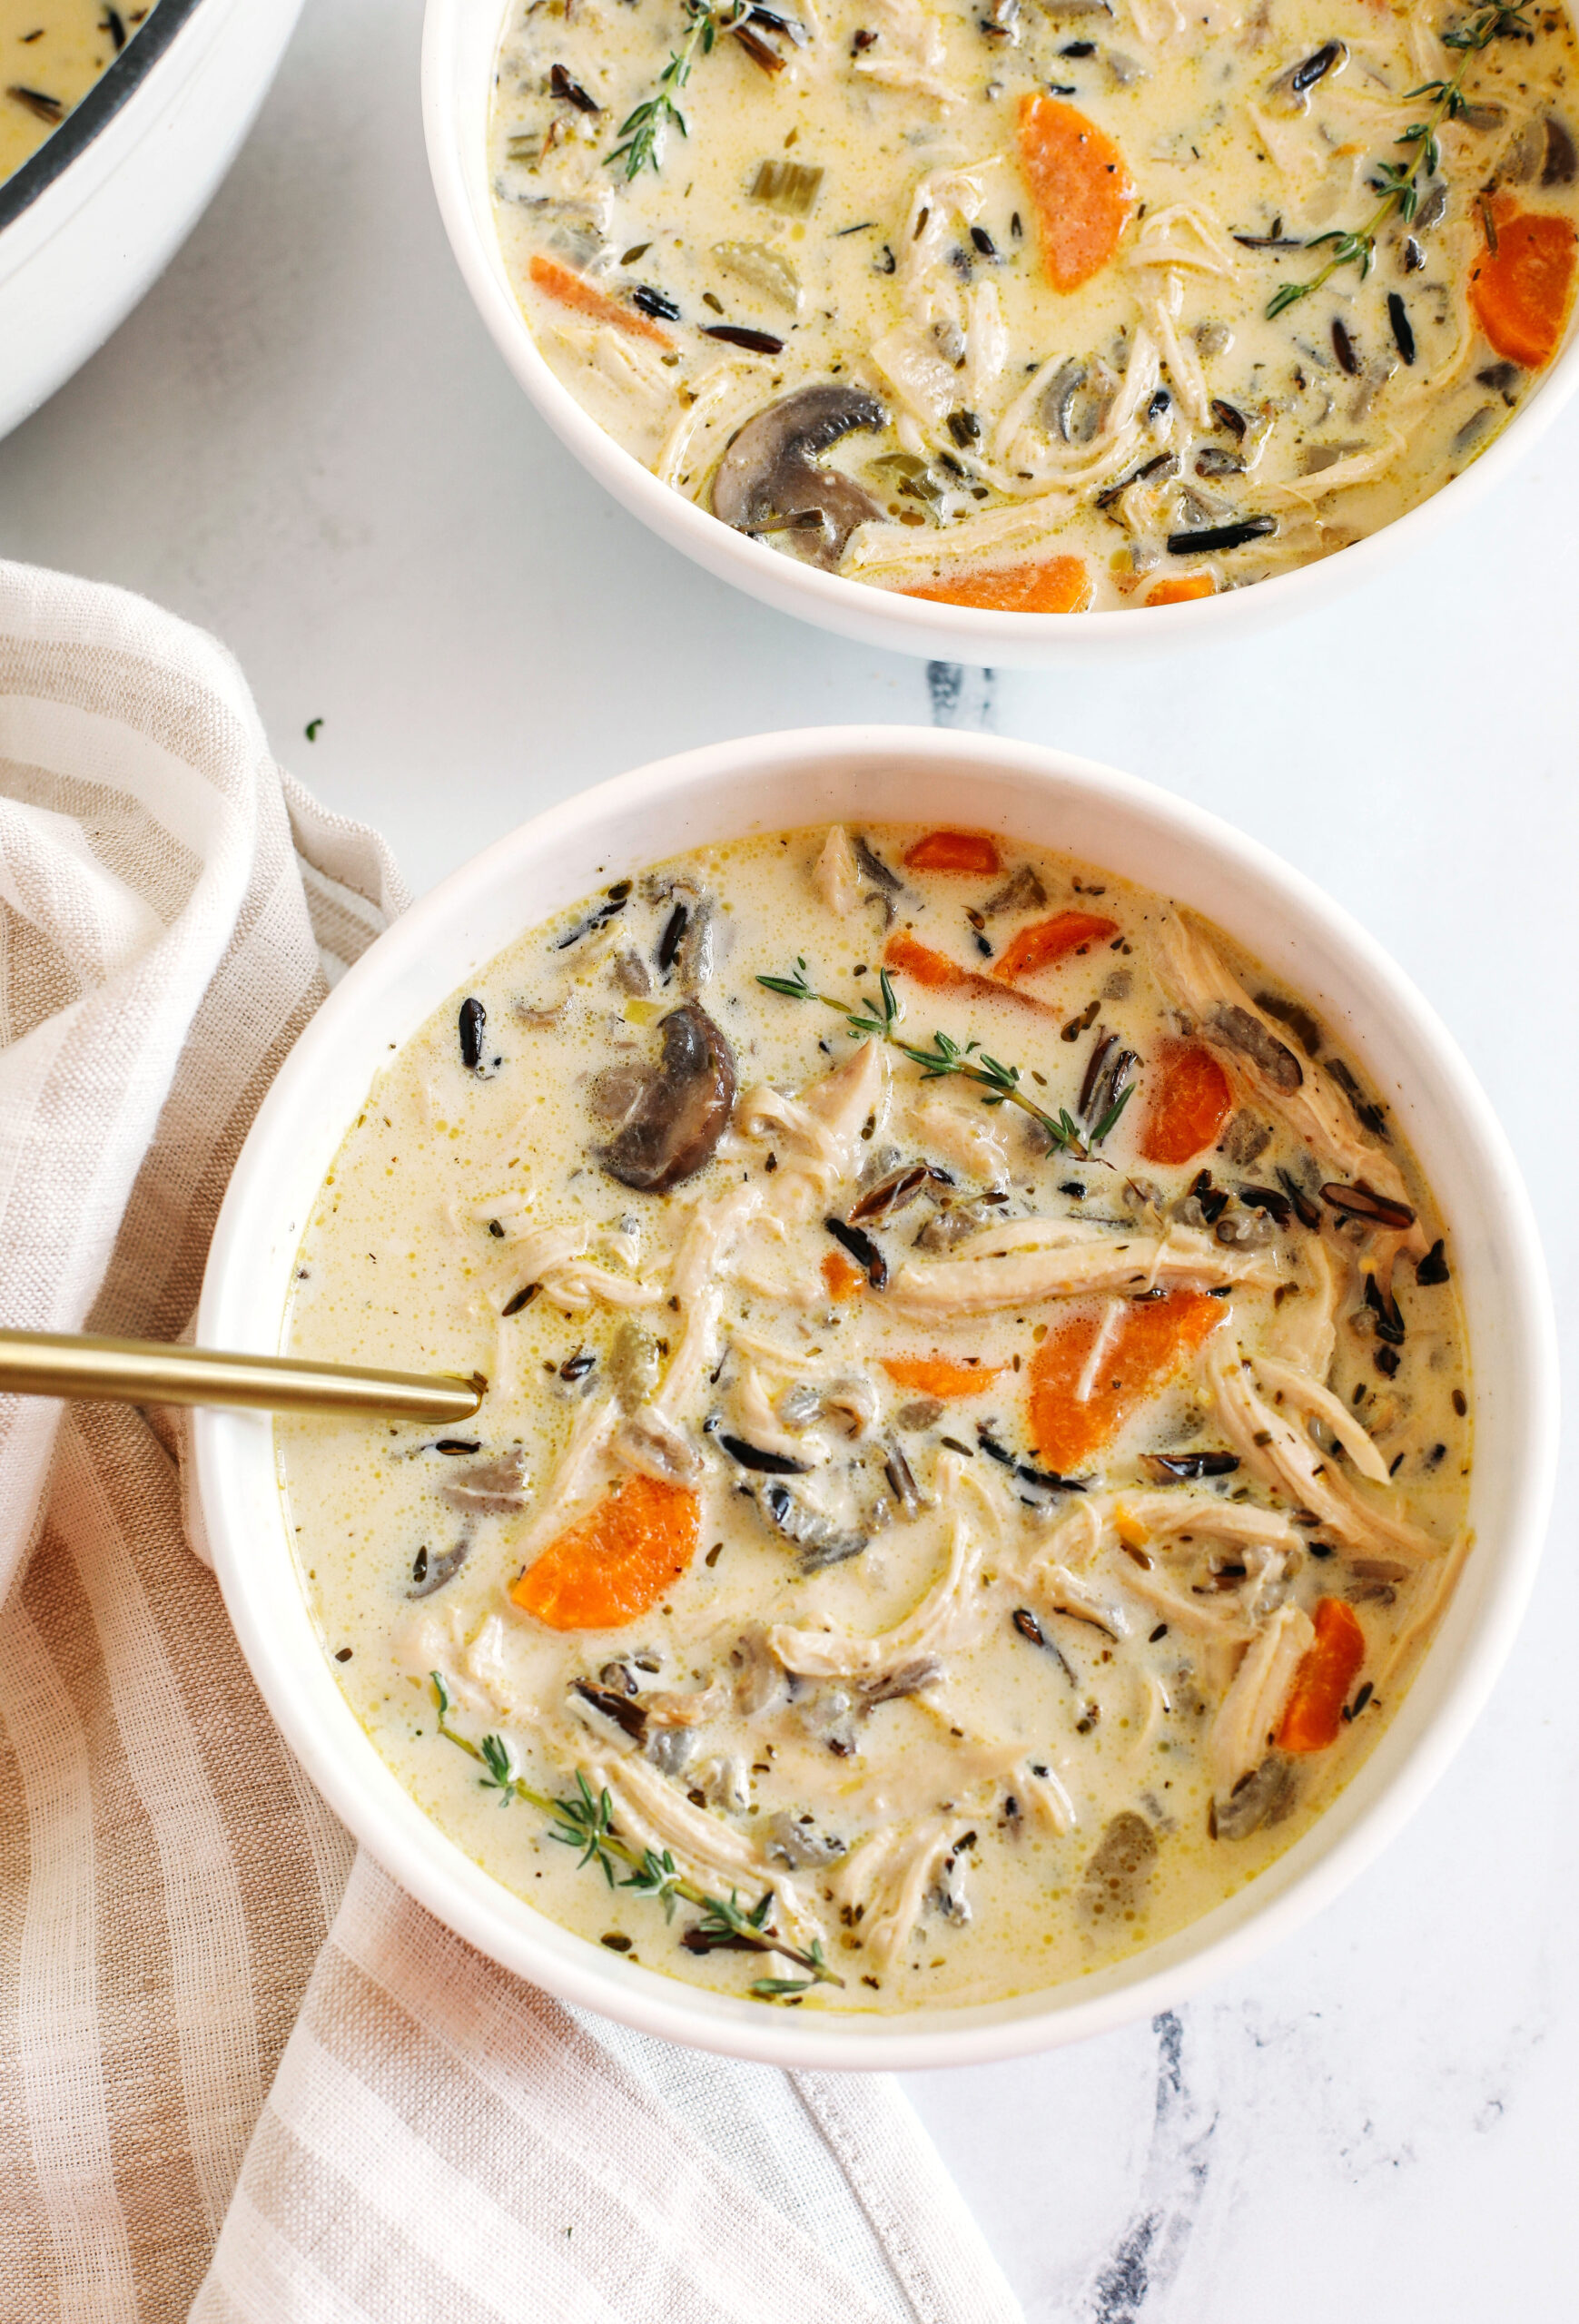 Creamy Chicken and Wild Rice Soup that is delicious, loaded with veggies and makes the perfect cozy meal that can easily made in your instant pot, slow cooker or right on the stove!